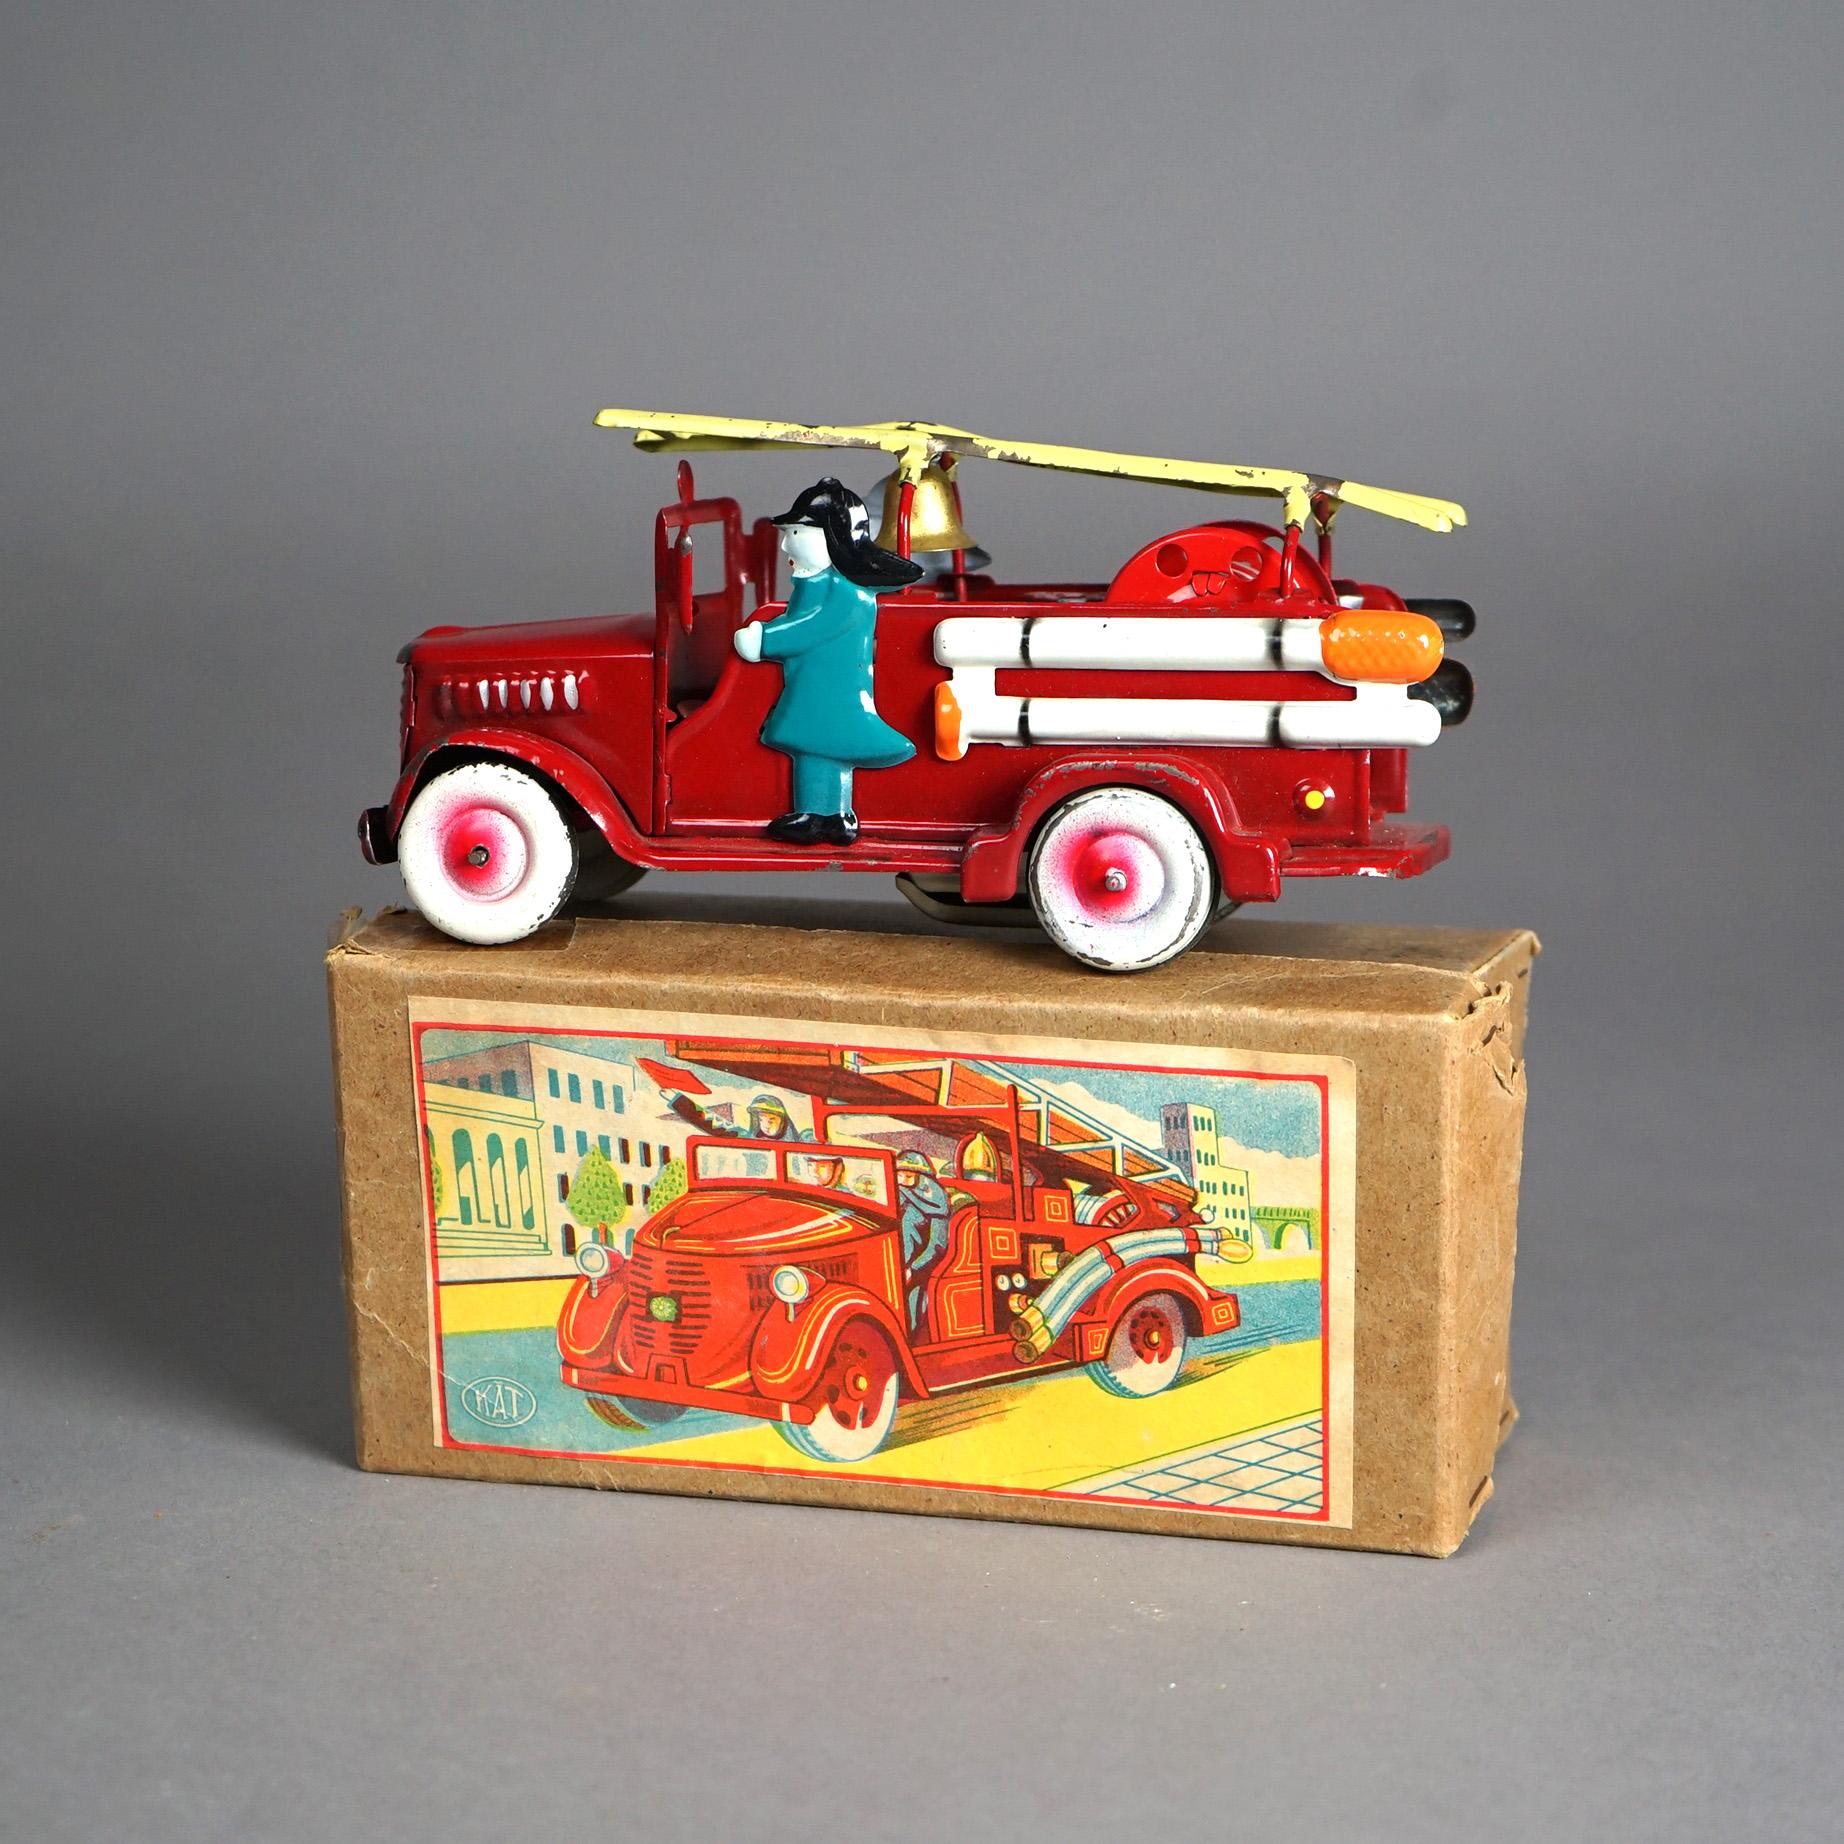 20th Century Japanese Tin Litho Toy Fire Engine In The Original Box Circa 1950